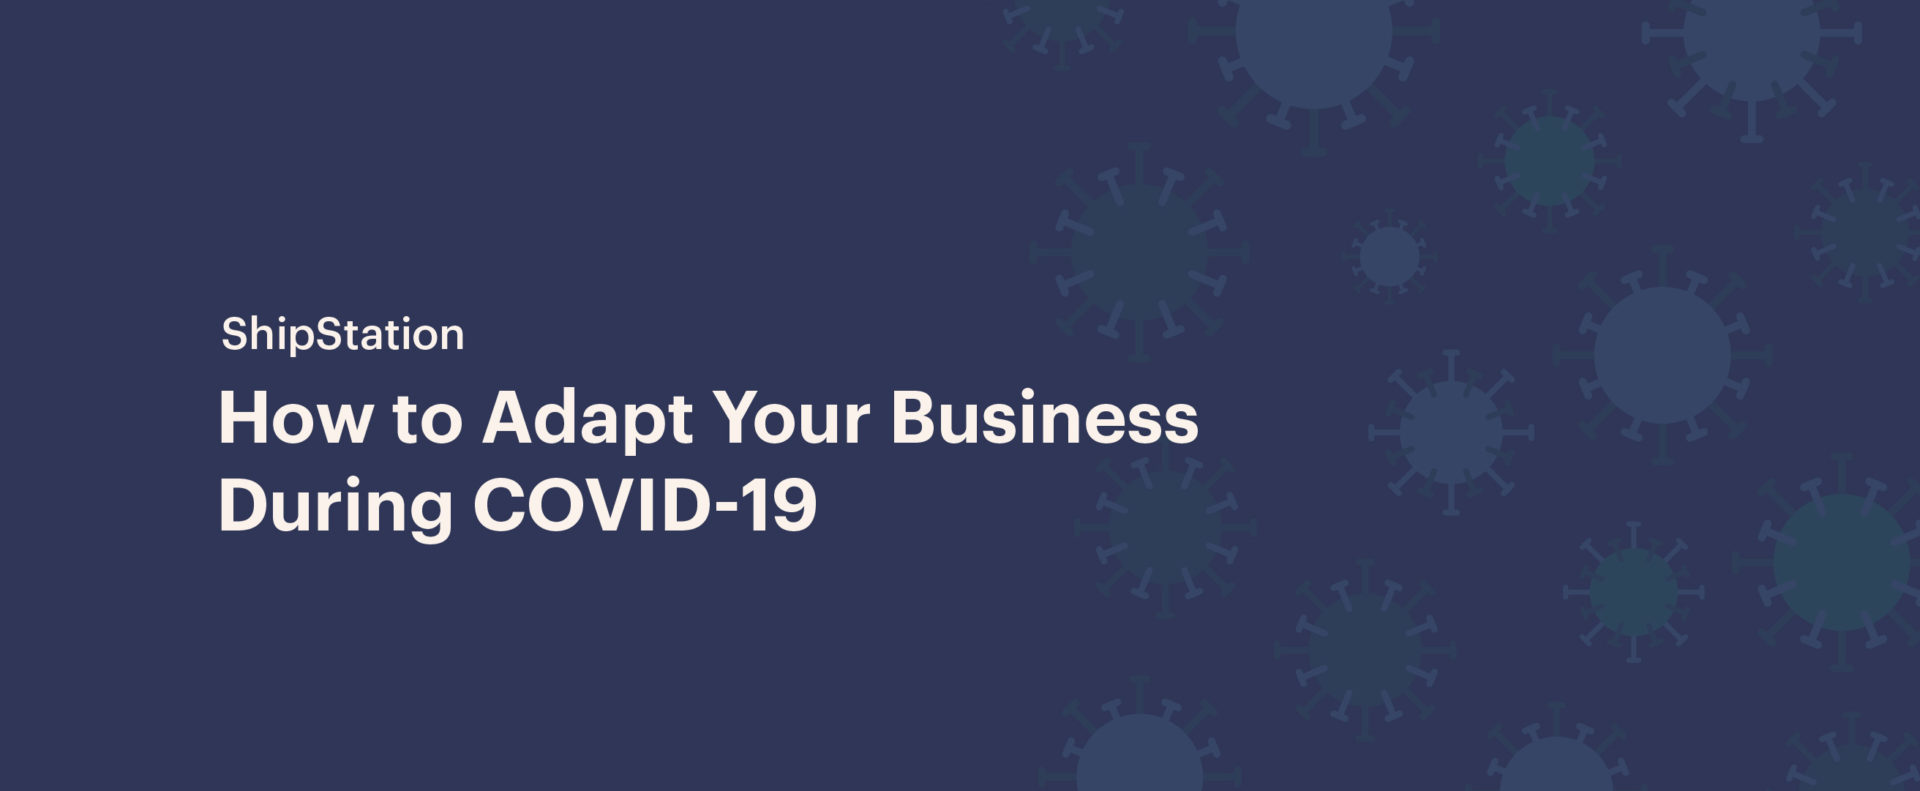 how to adapt your business during covid-19 graphic